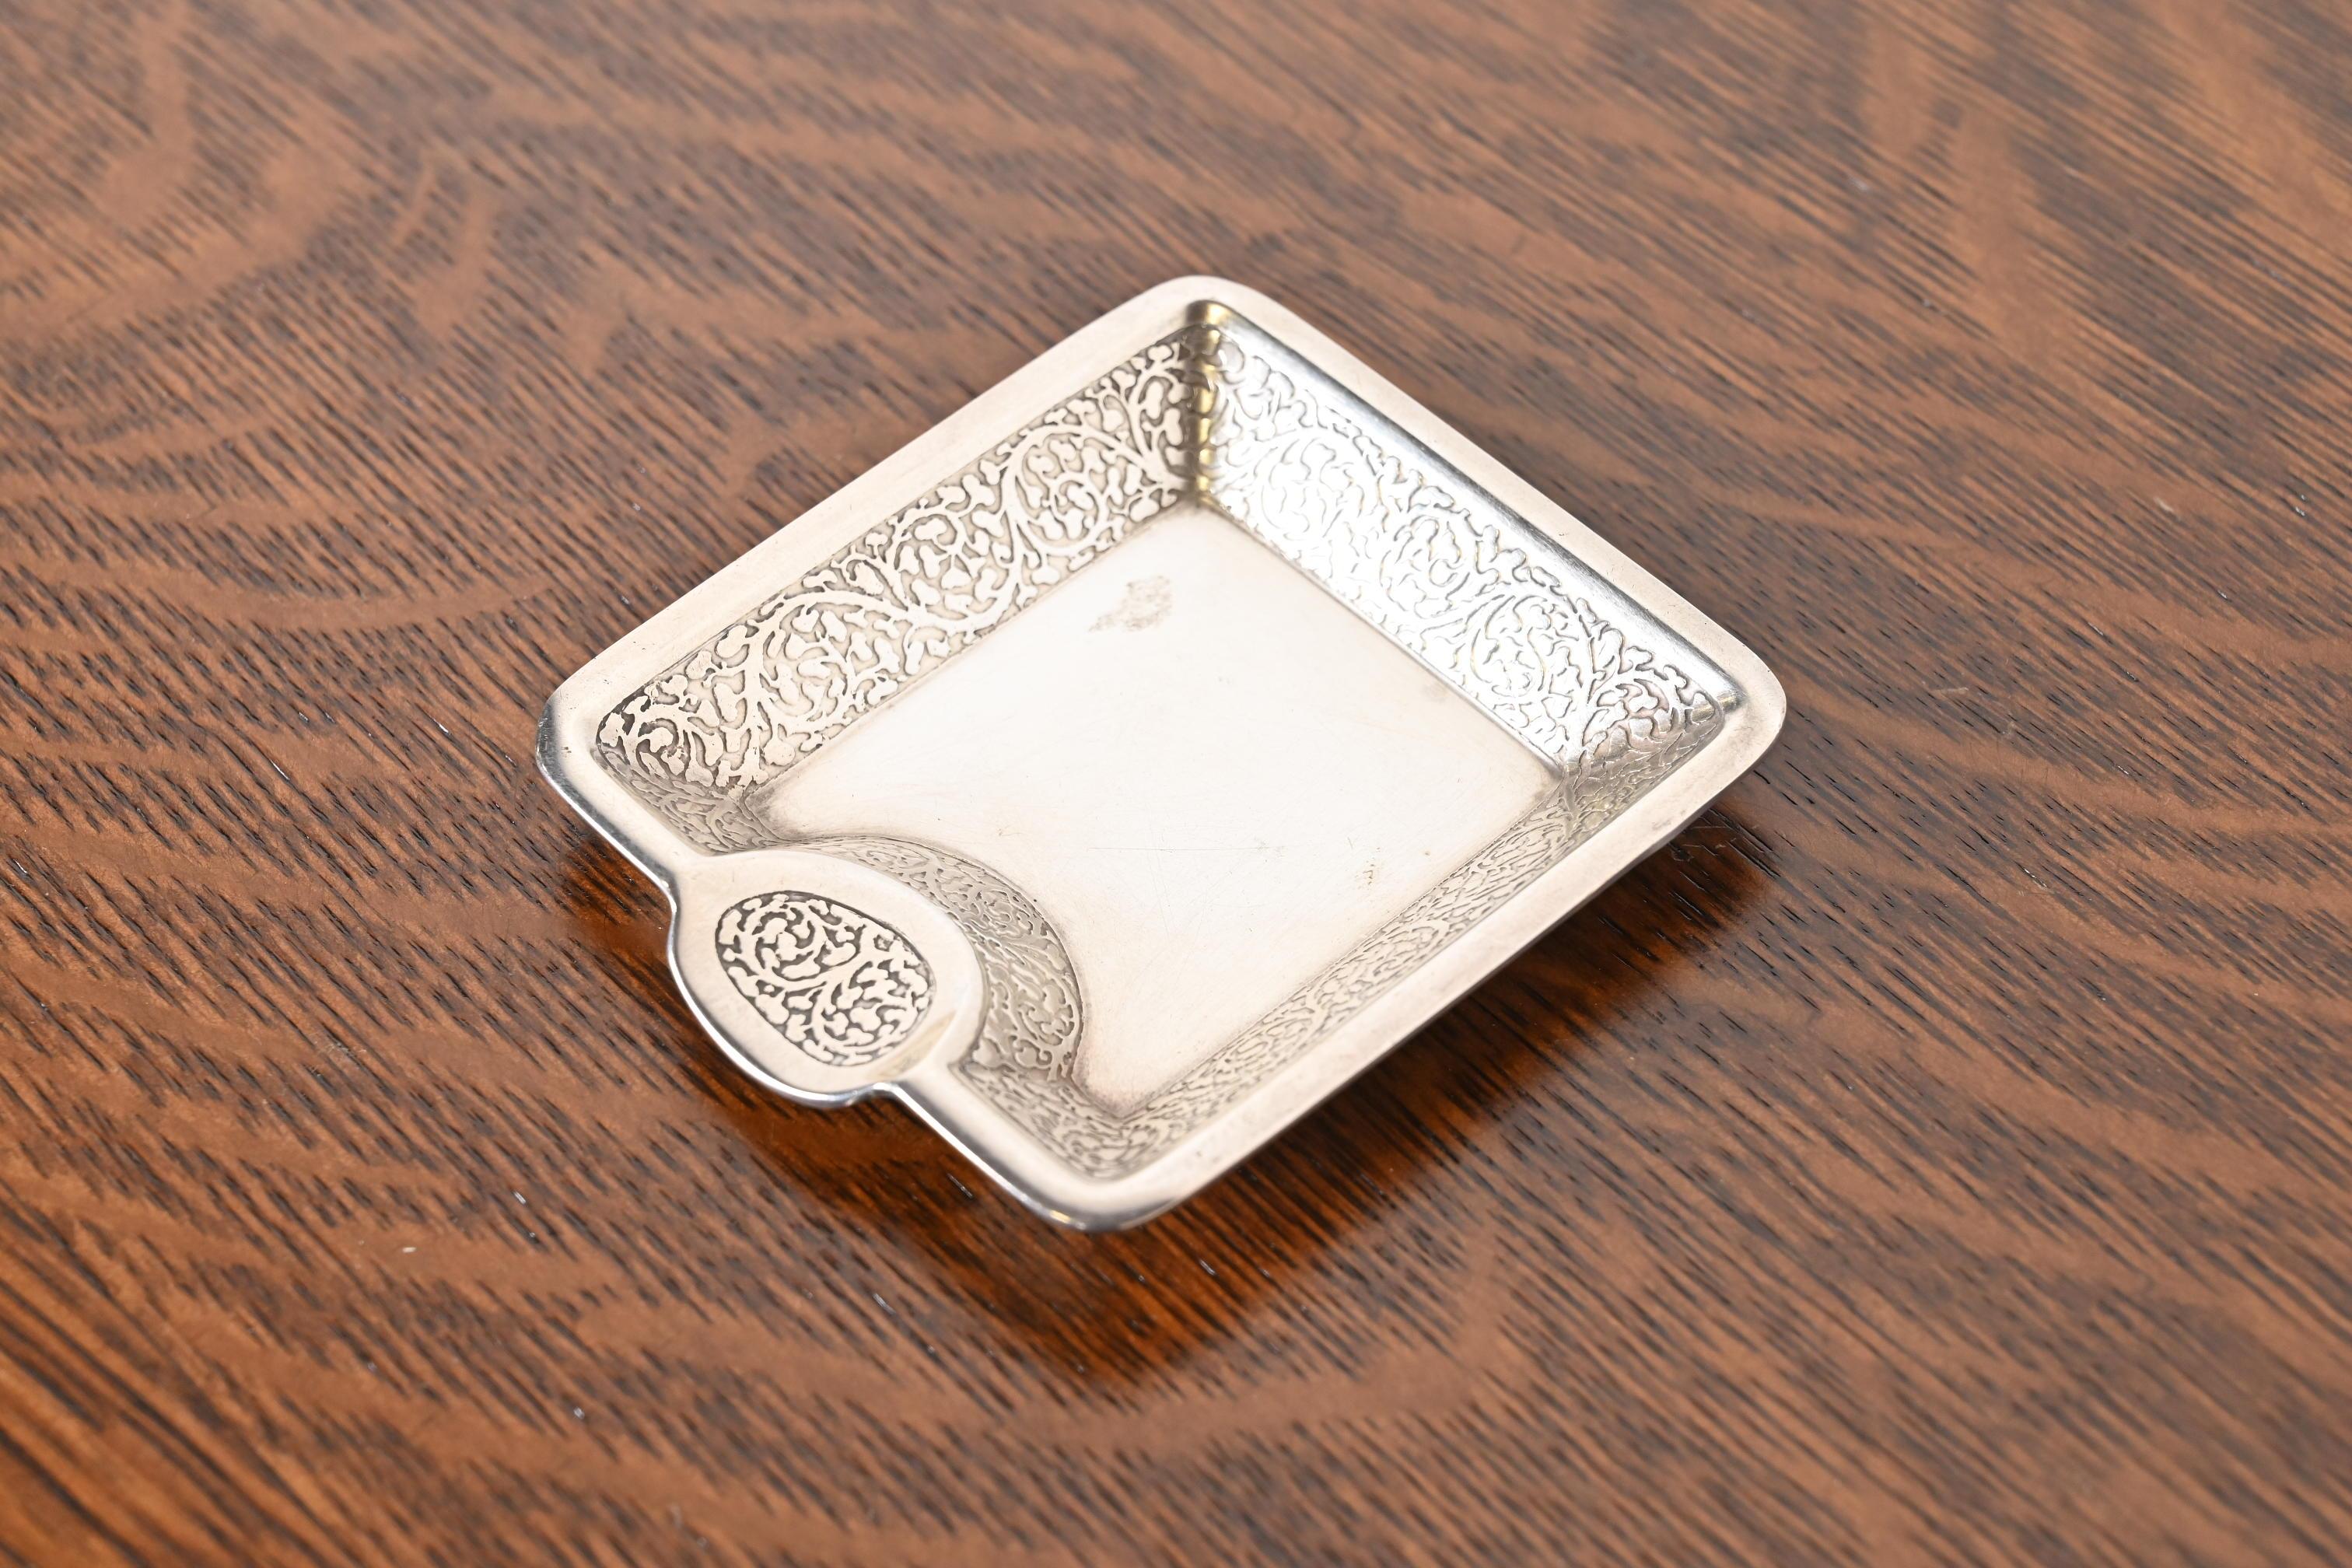 Tiffany & Co. Art Deco Sterling Silver Ashtray or Catchall Tray In Good Condition For Sale In South Bend, IN